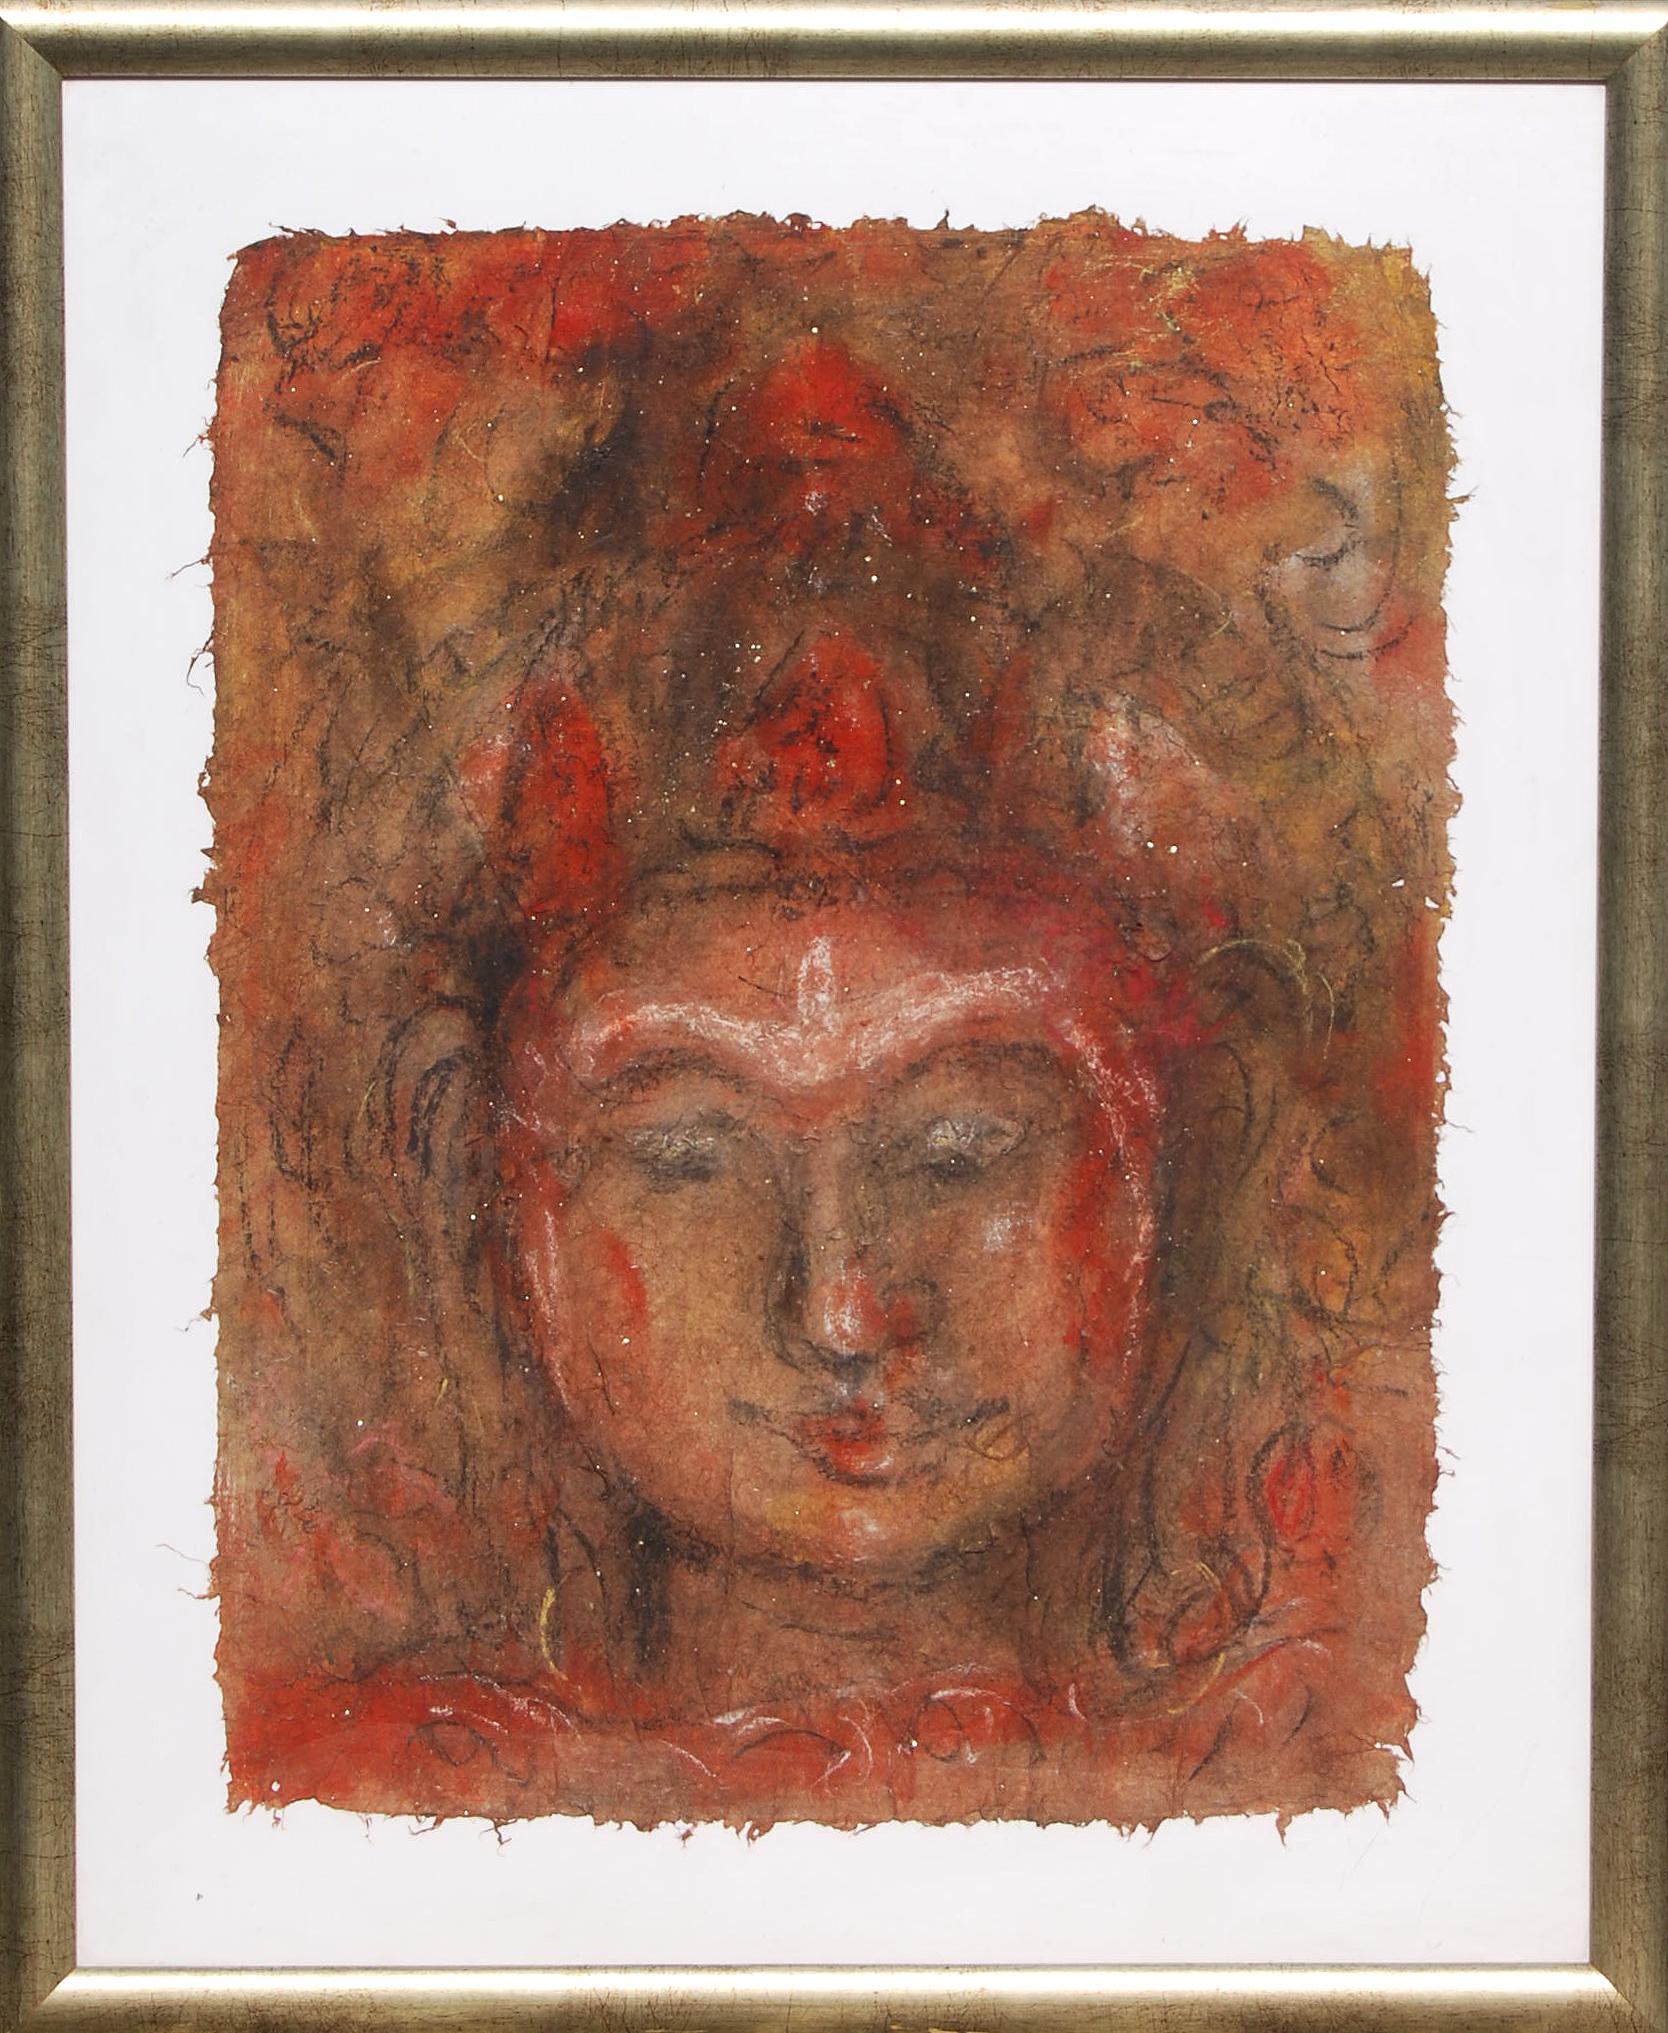 Buddha, Mixed Media on paper, Red, Brown by Modern Indian Artist "In Stock" - Mixed Media Art by Suhas Roy